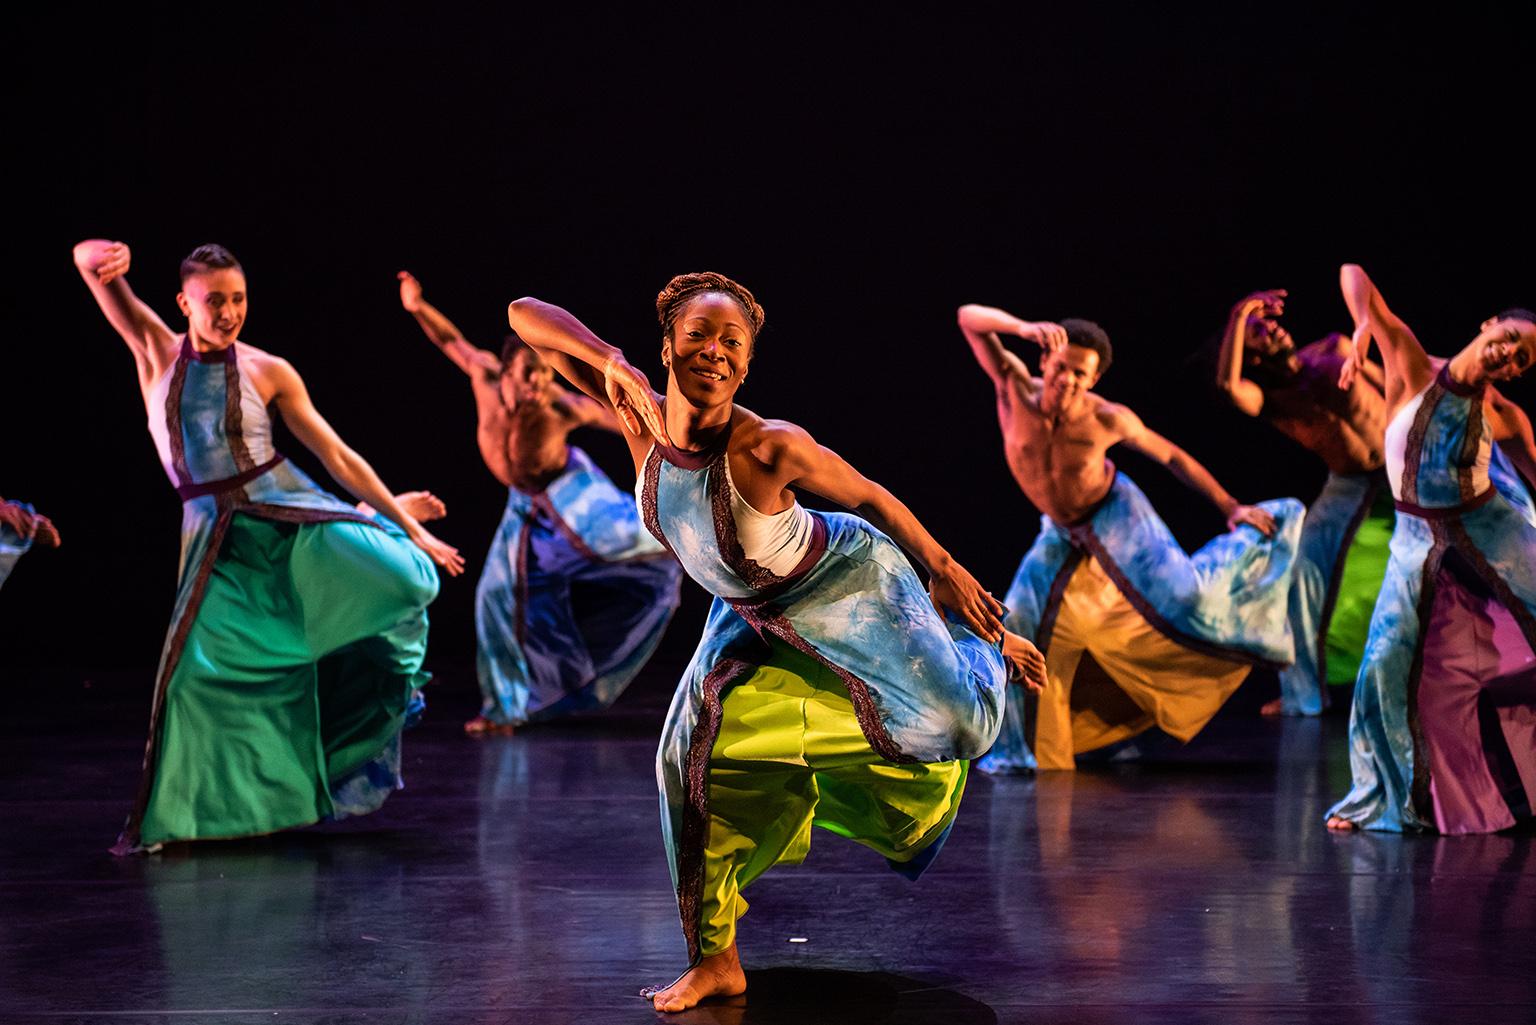 Deeply Rooted Dance Theater company in “Heaven.” (Photo by Michelle Reid)